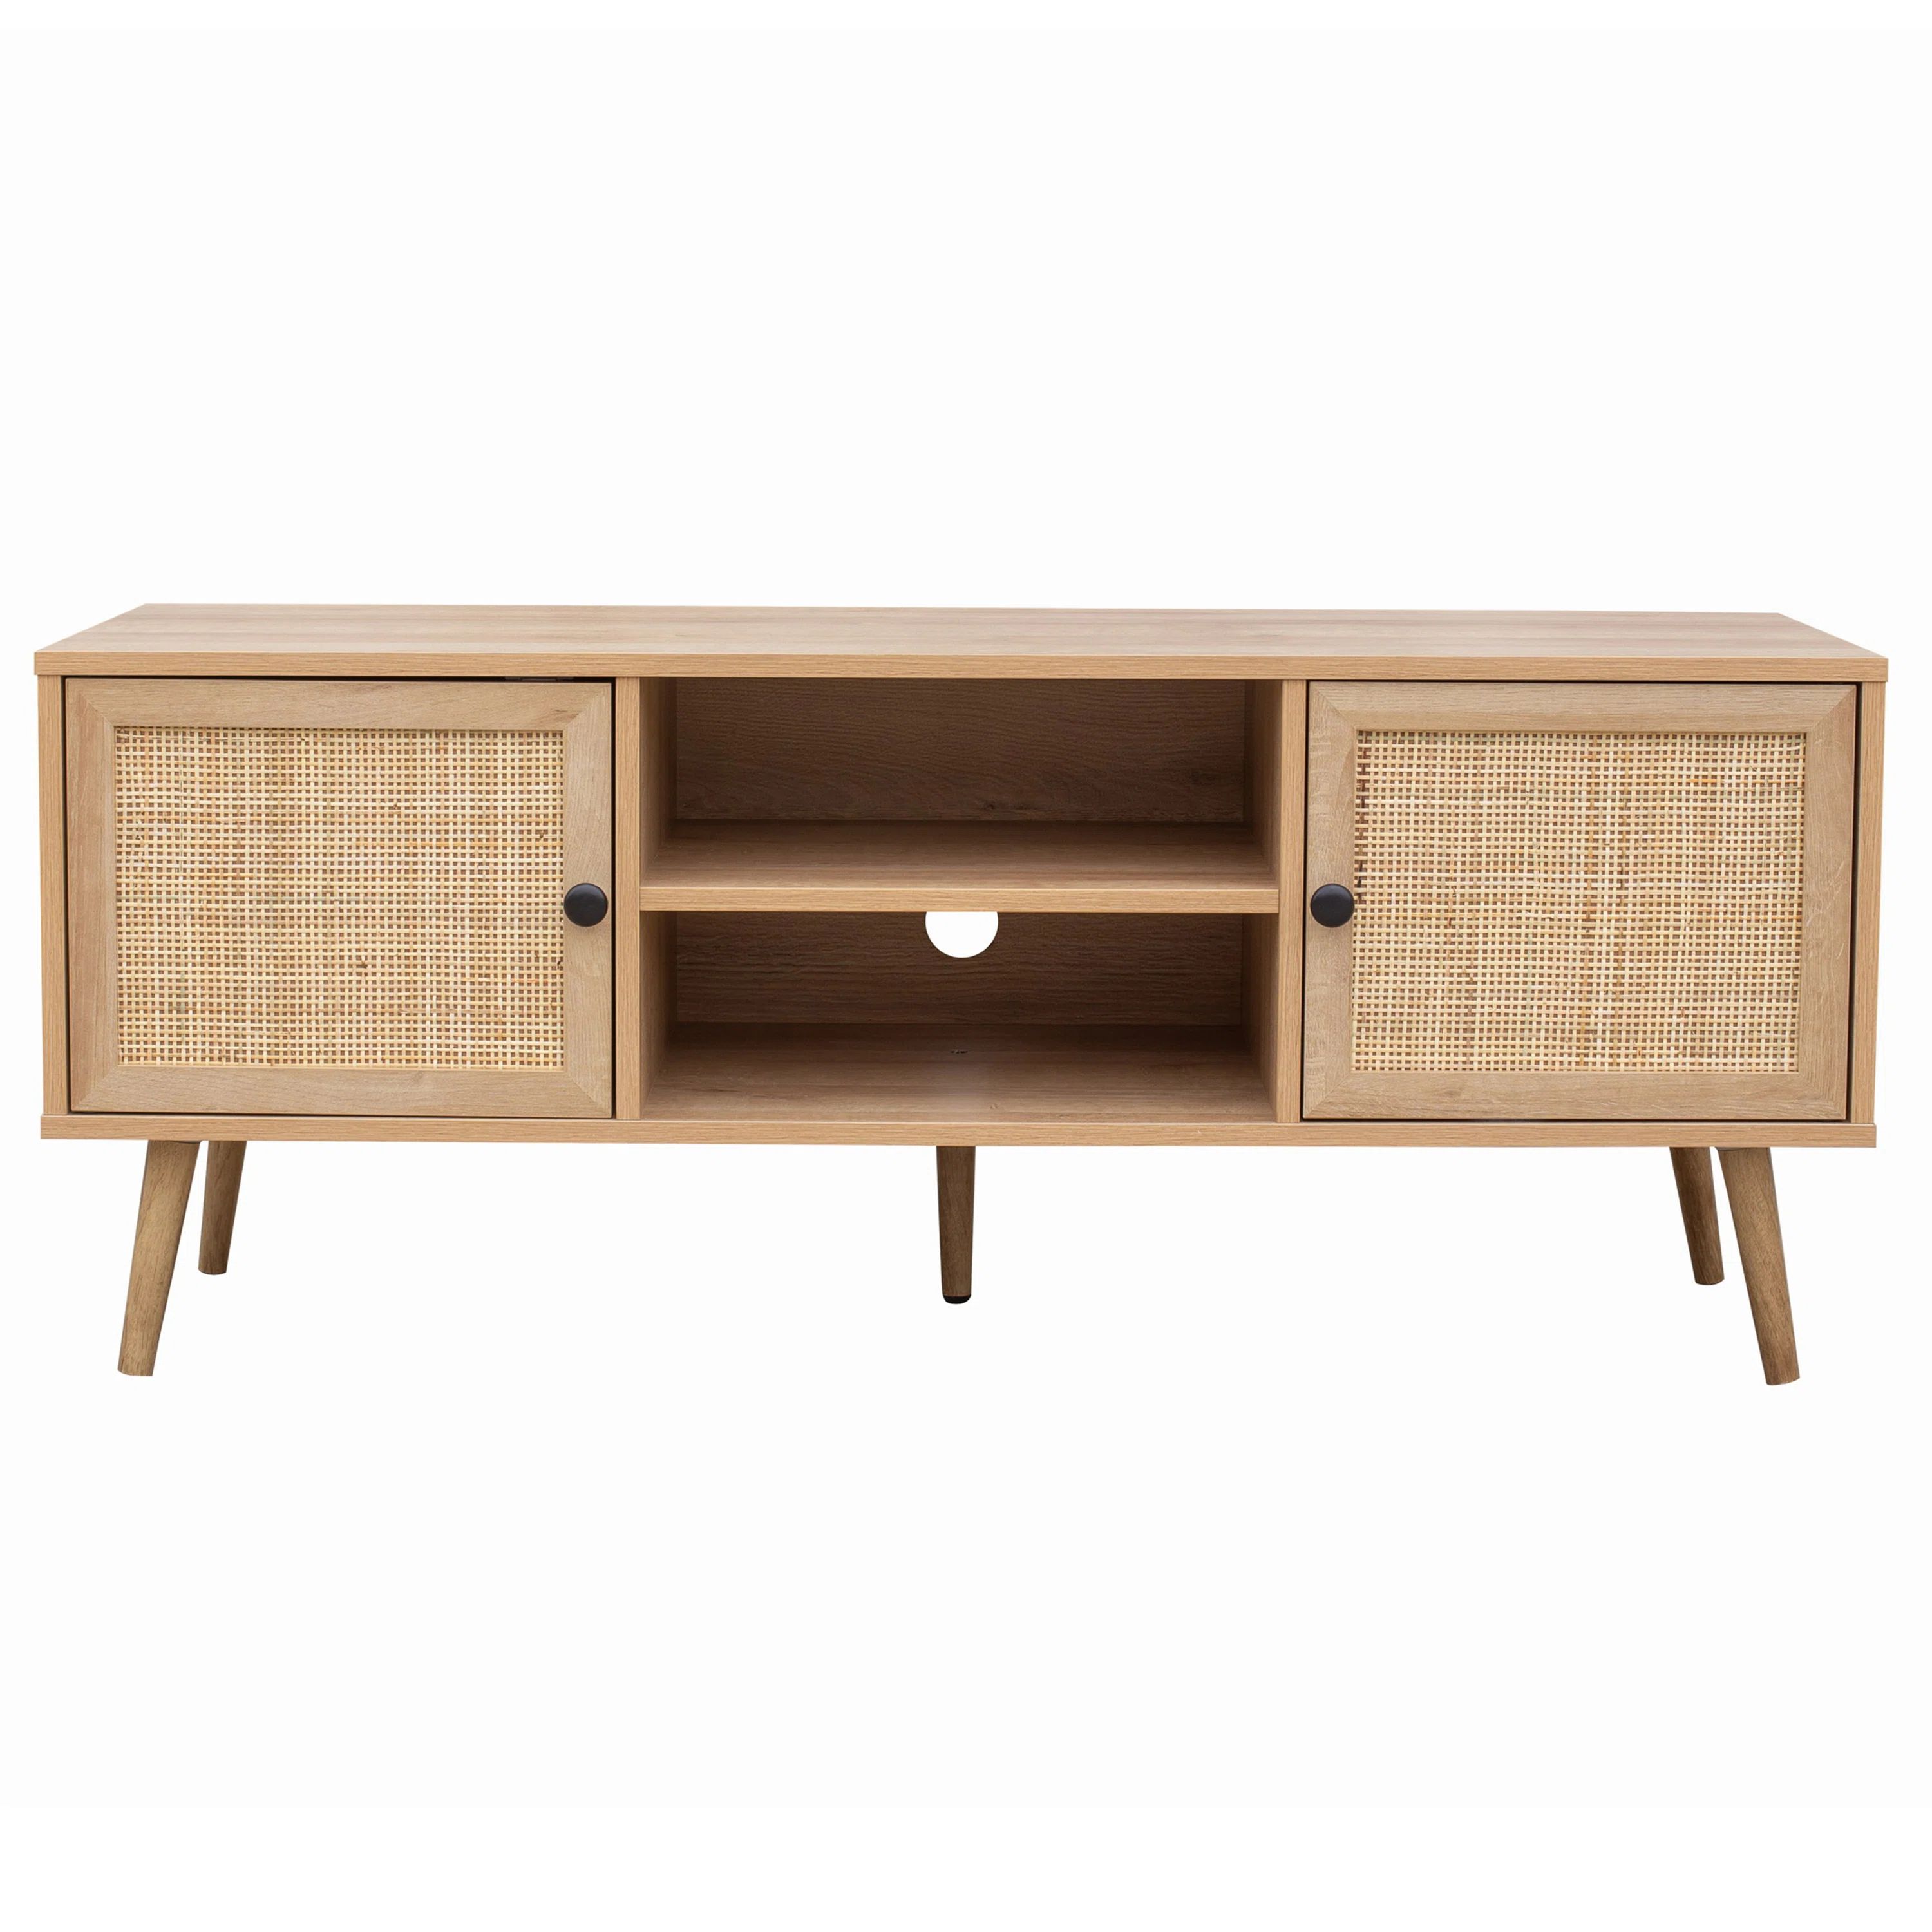 Presley Rattan Storage Media Console for TVs up to 59" | Wayfair North America